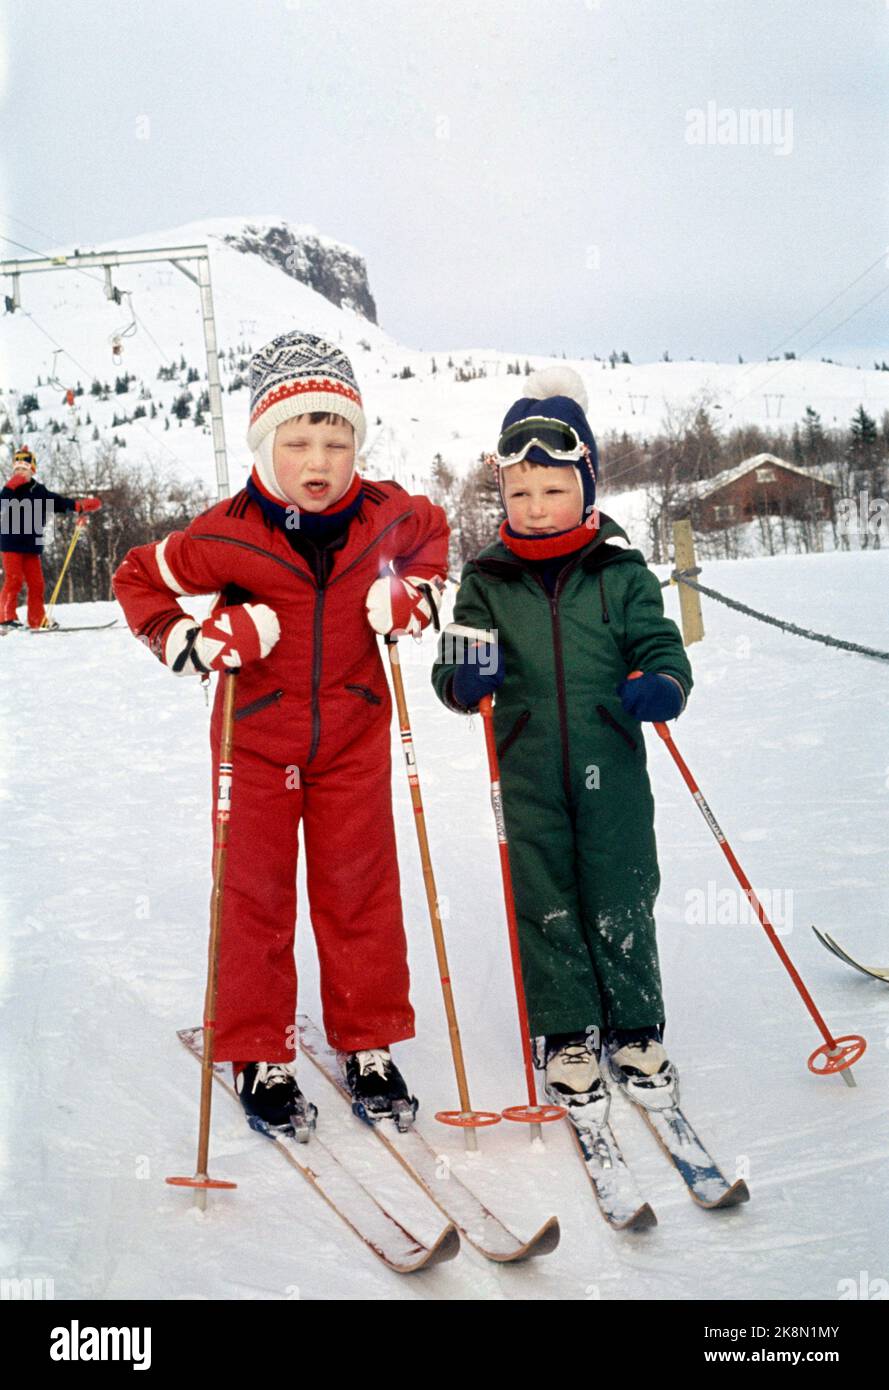 Gausdal March 1977. The Crown Prince family has winter holidays. Princess Märtha Louise and Prince Haakon Skiing in Gausdal. Photo: Svein Hammerstad / NTB / NTB Stock Photo